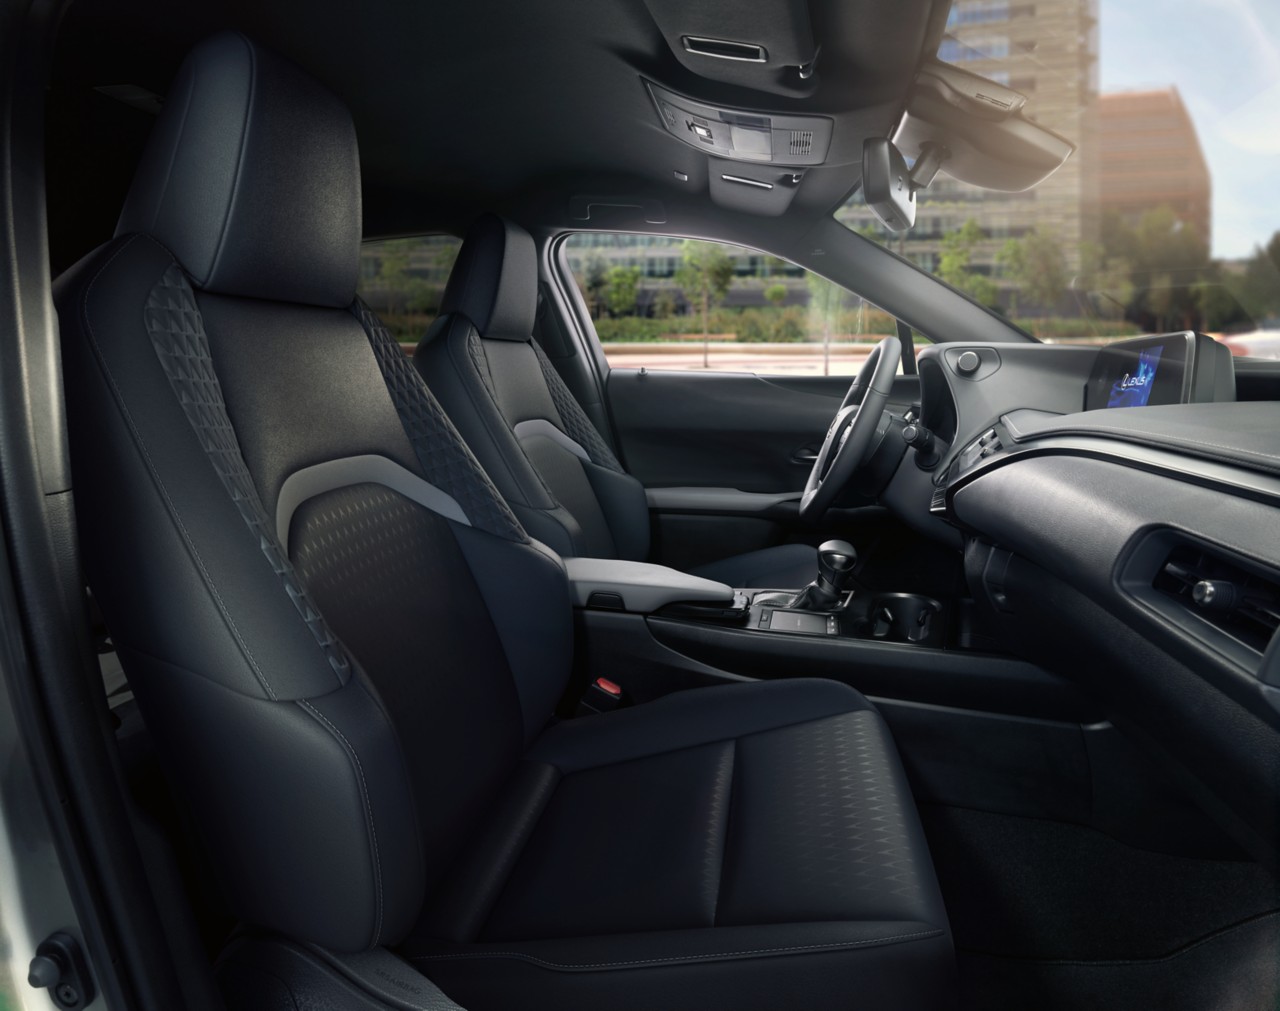 Lexus UX 250h drivers seat and front passenger seat 